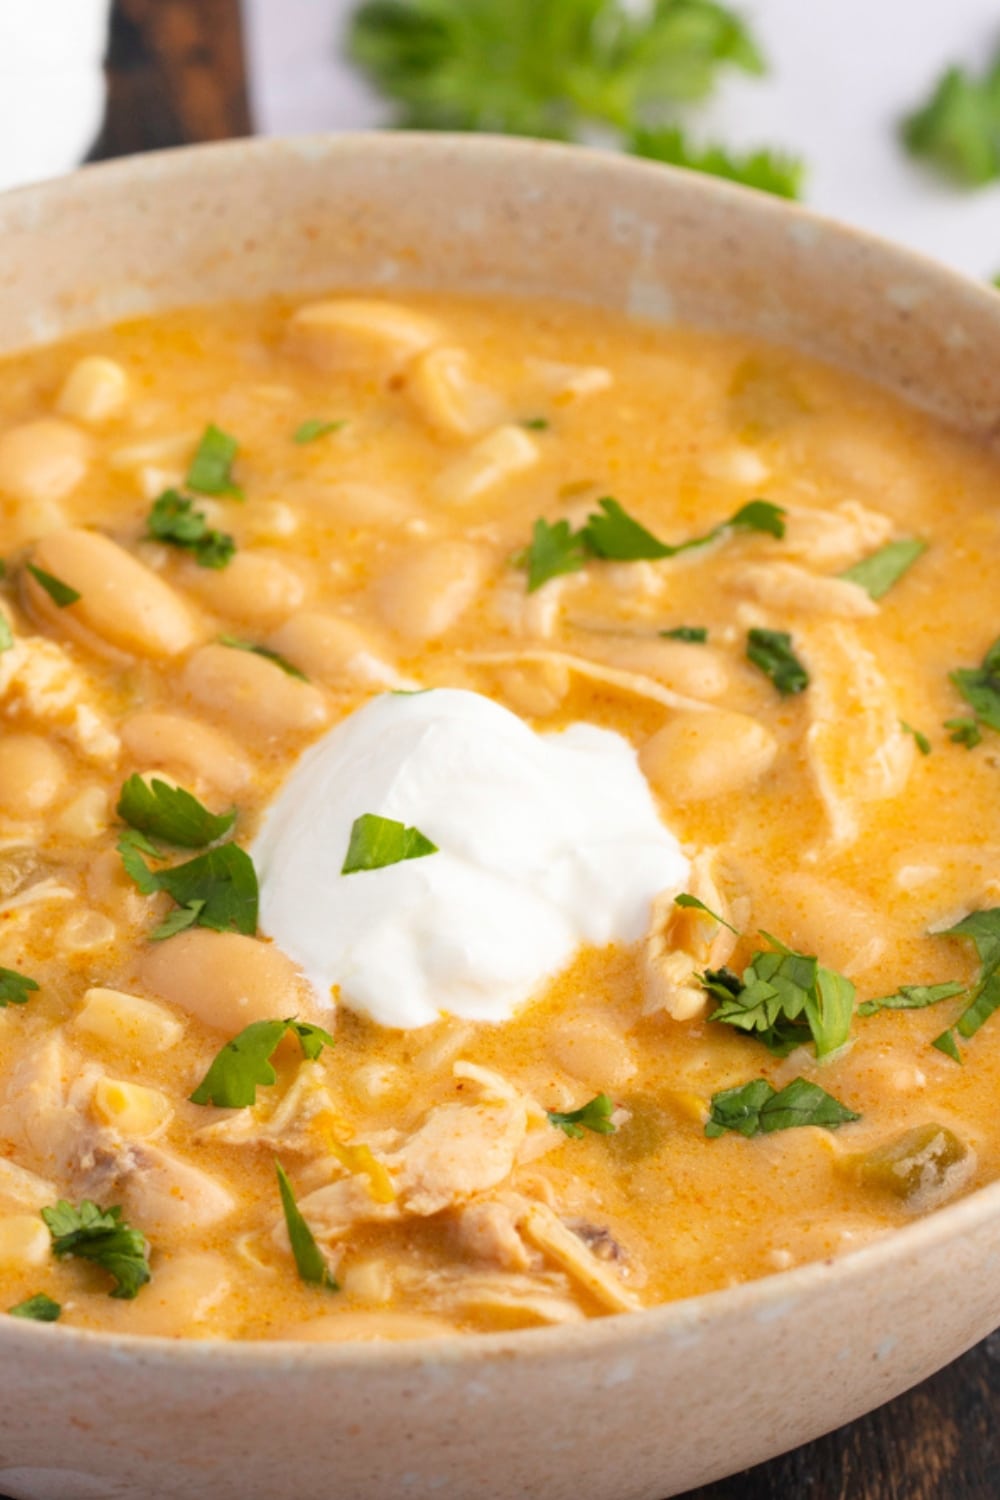 Bowl of White Chicken Chili with Sour Cream and Herbs